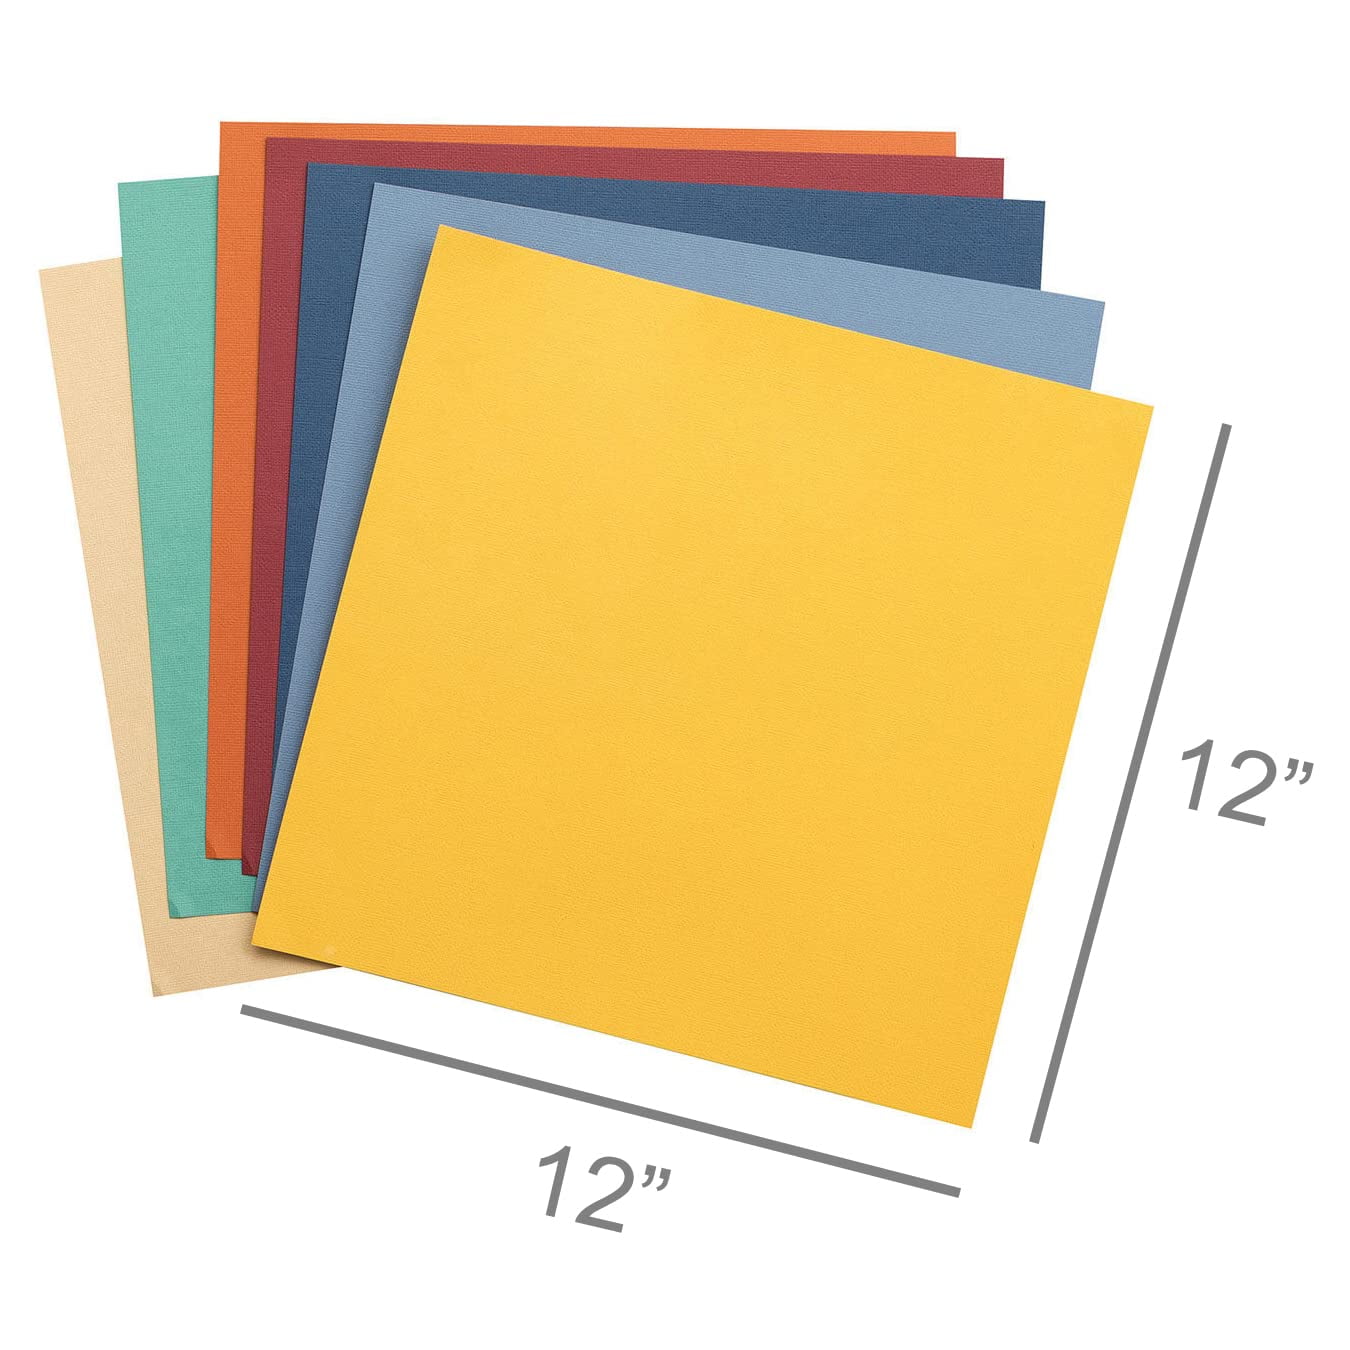 FSWCCK 60 Pack A4 Size Colorful Cardstock 250GSM, 30 Assorted Colors,  Premium Thick Card Stock for DIY Art, Scrapbook, Paper Crafting,School  Supplies